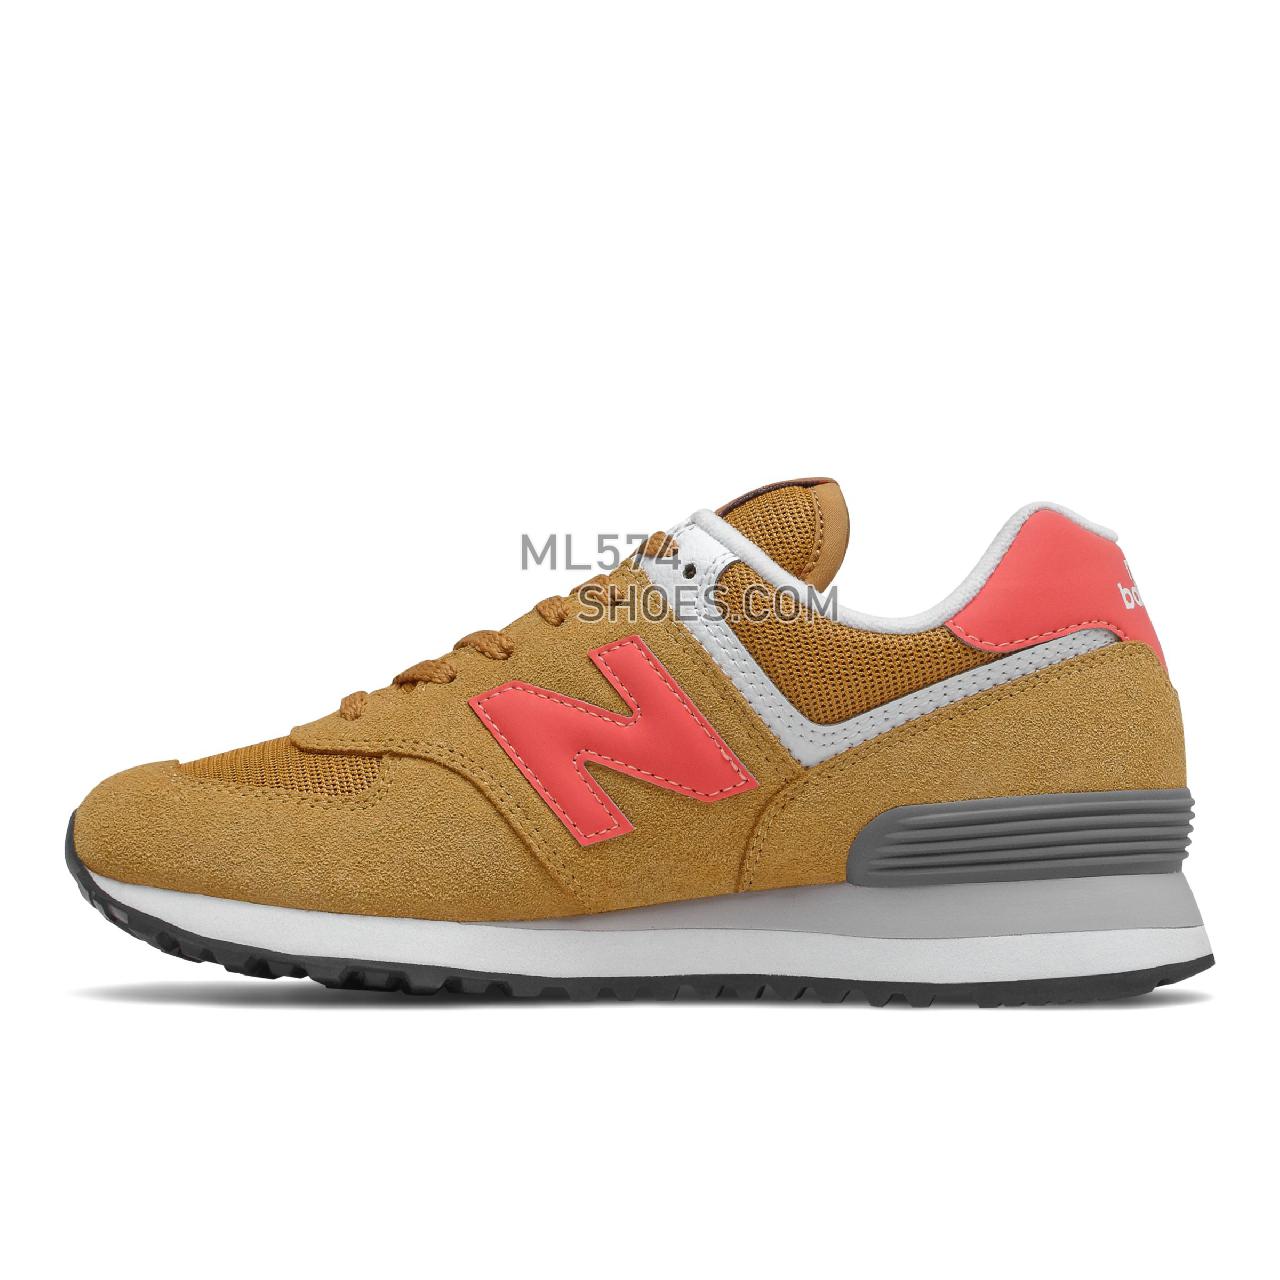 New Balance 574 - Women's Classic Sneakers - Workwear with Red - WL574HA2